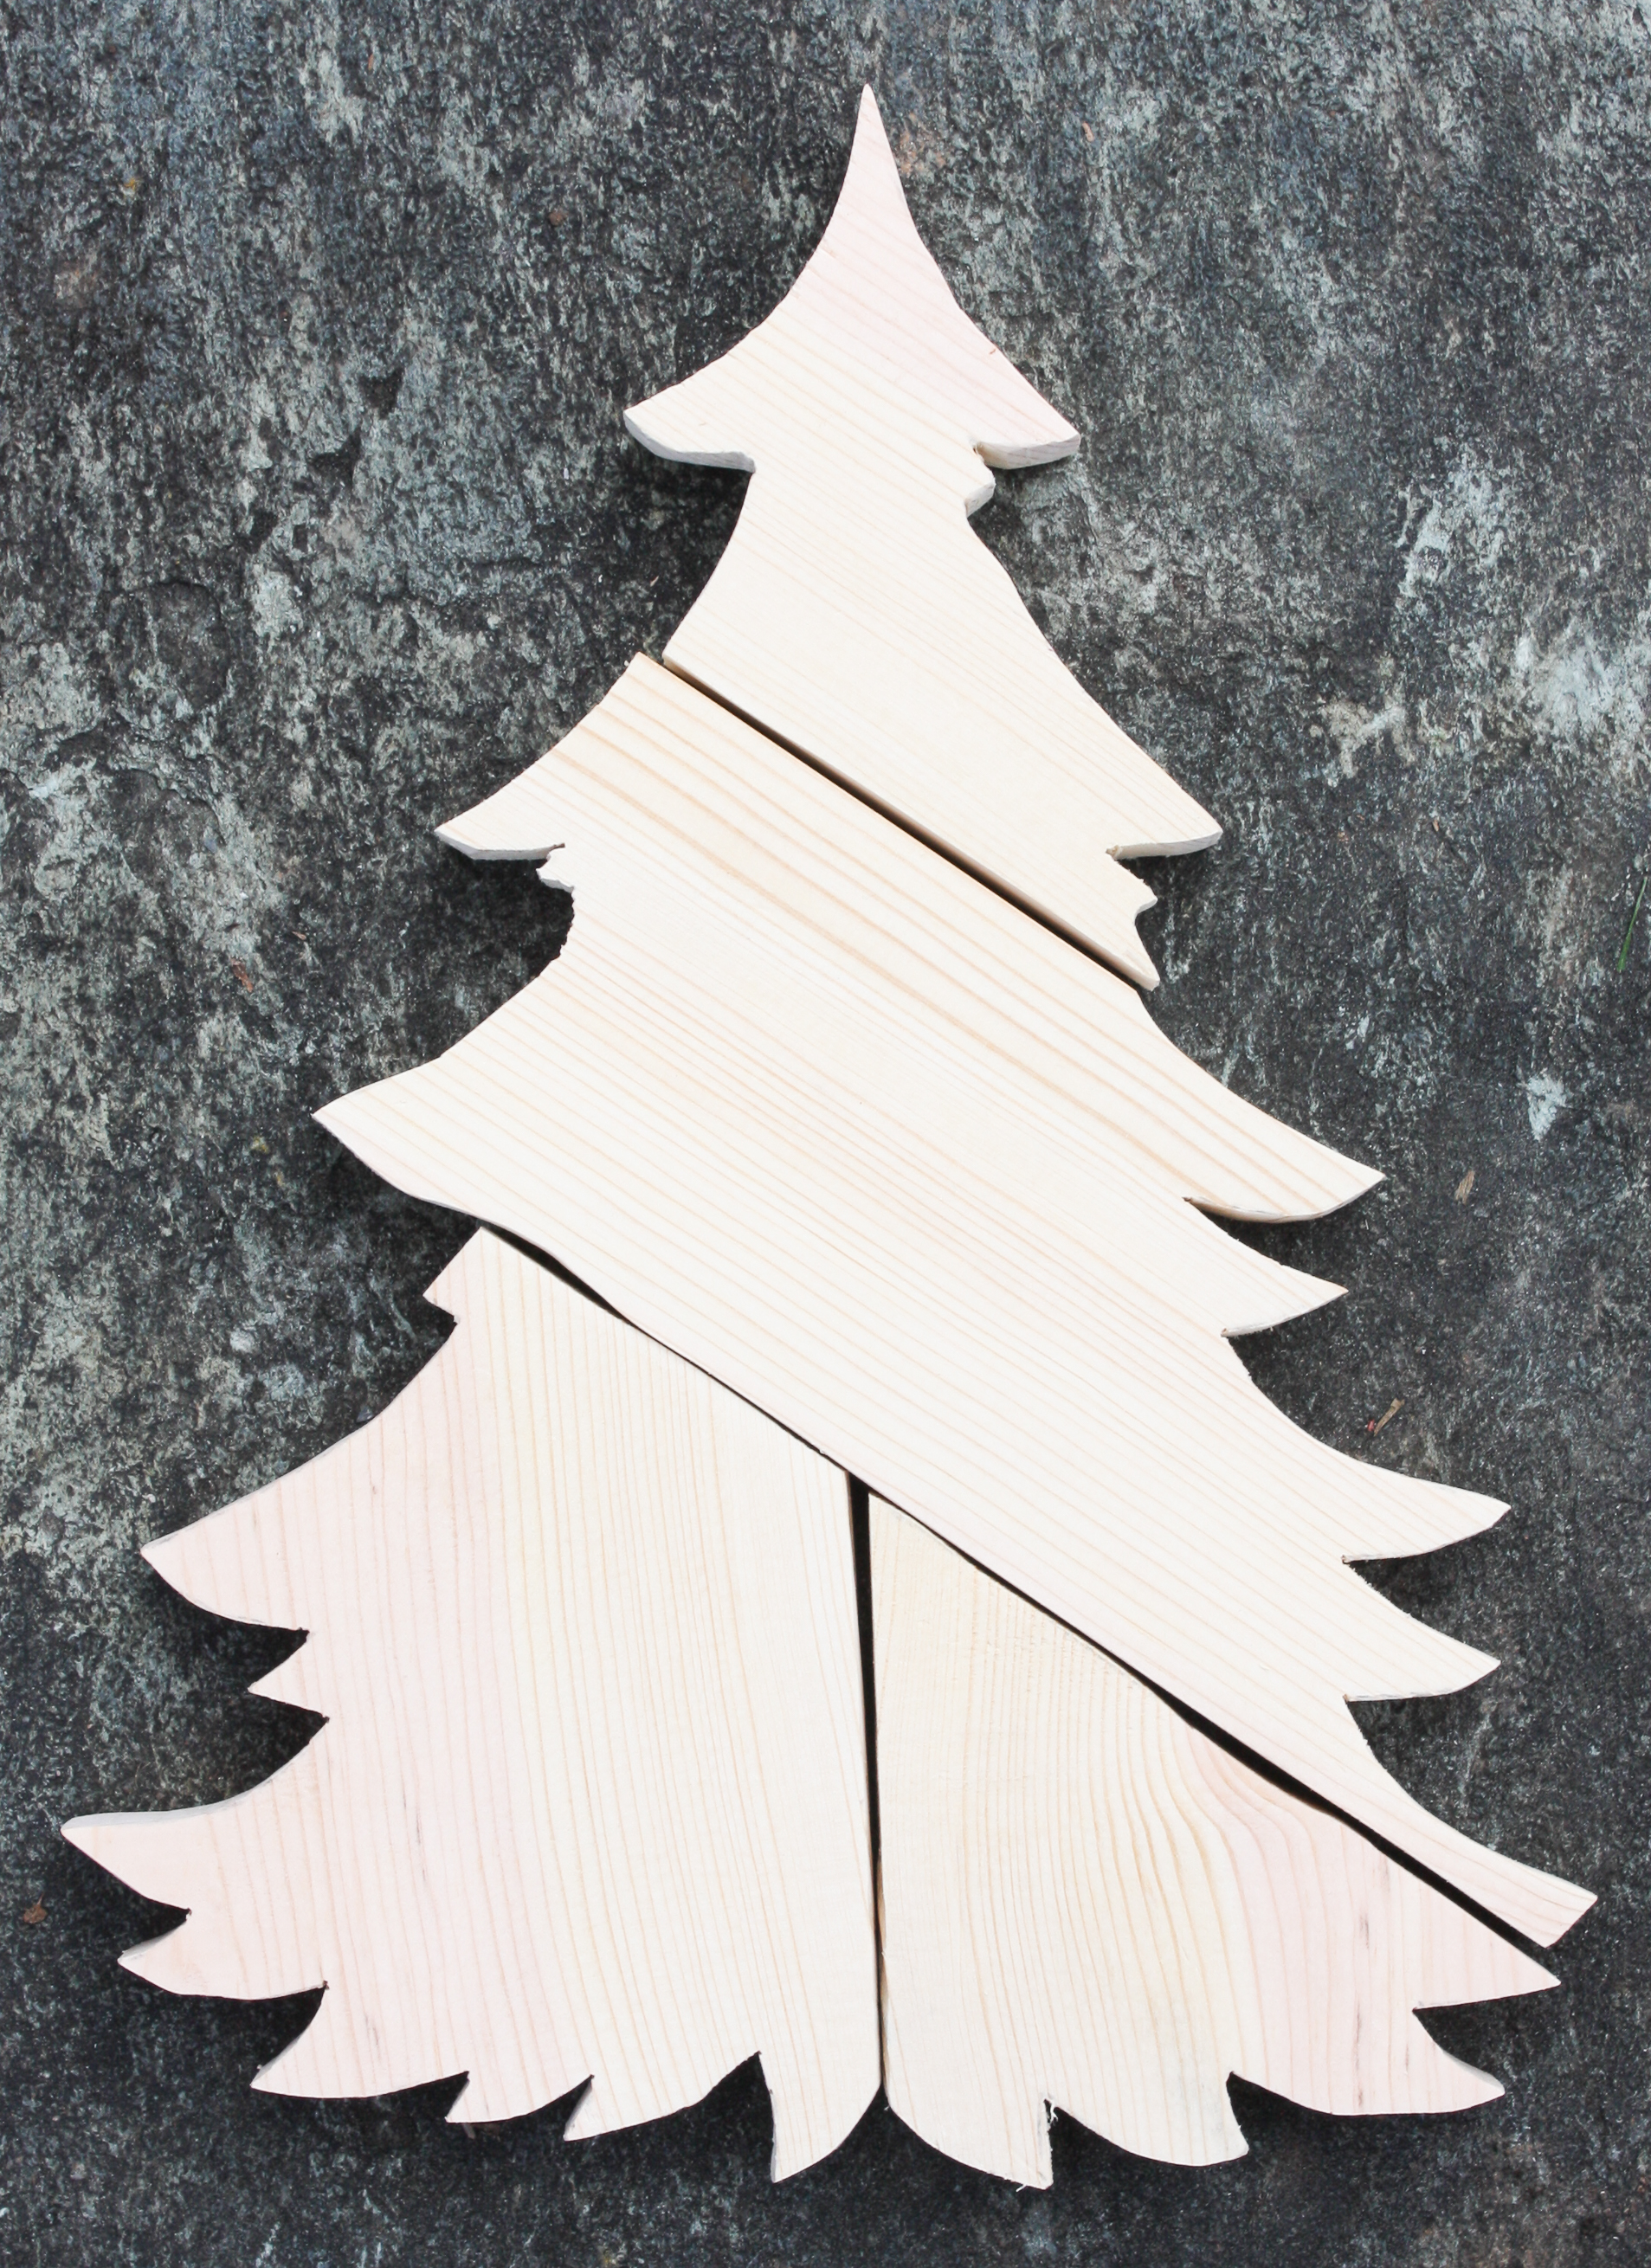 How to Make a Patchwork Wood Christmas Tree - Follow the step-by-step tutorial to make your own.